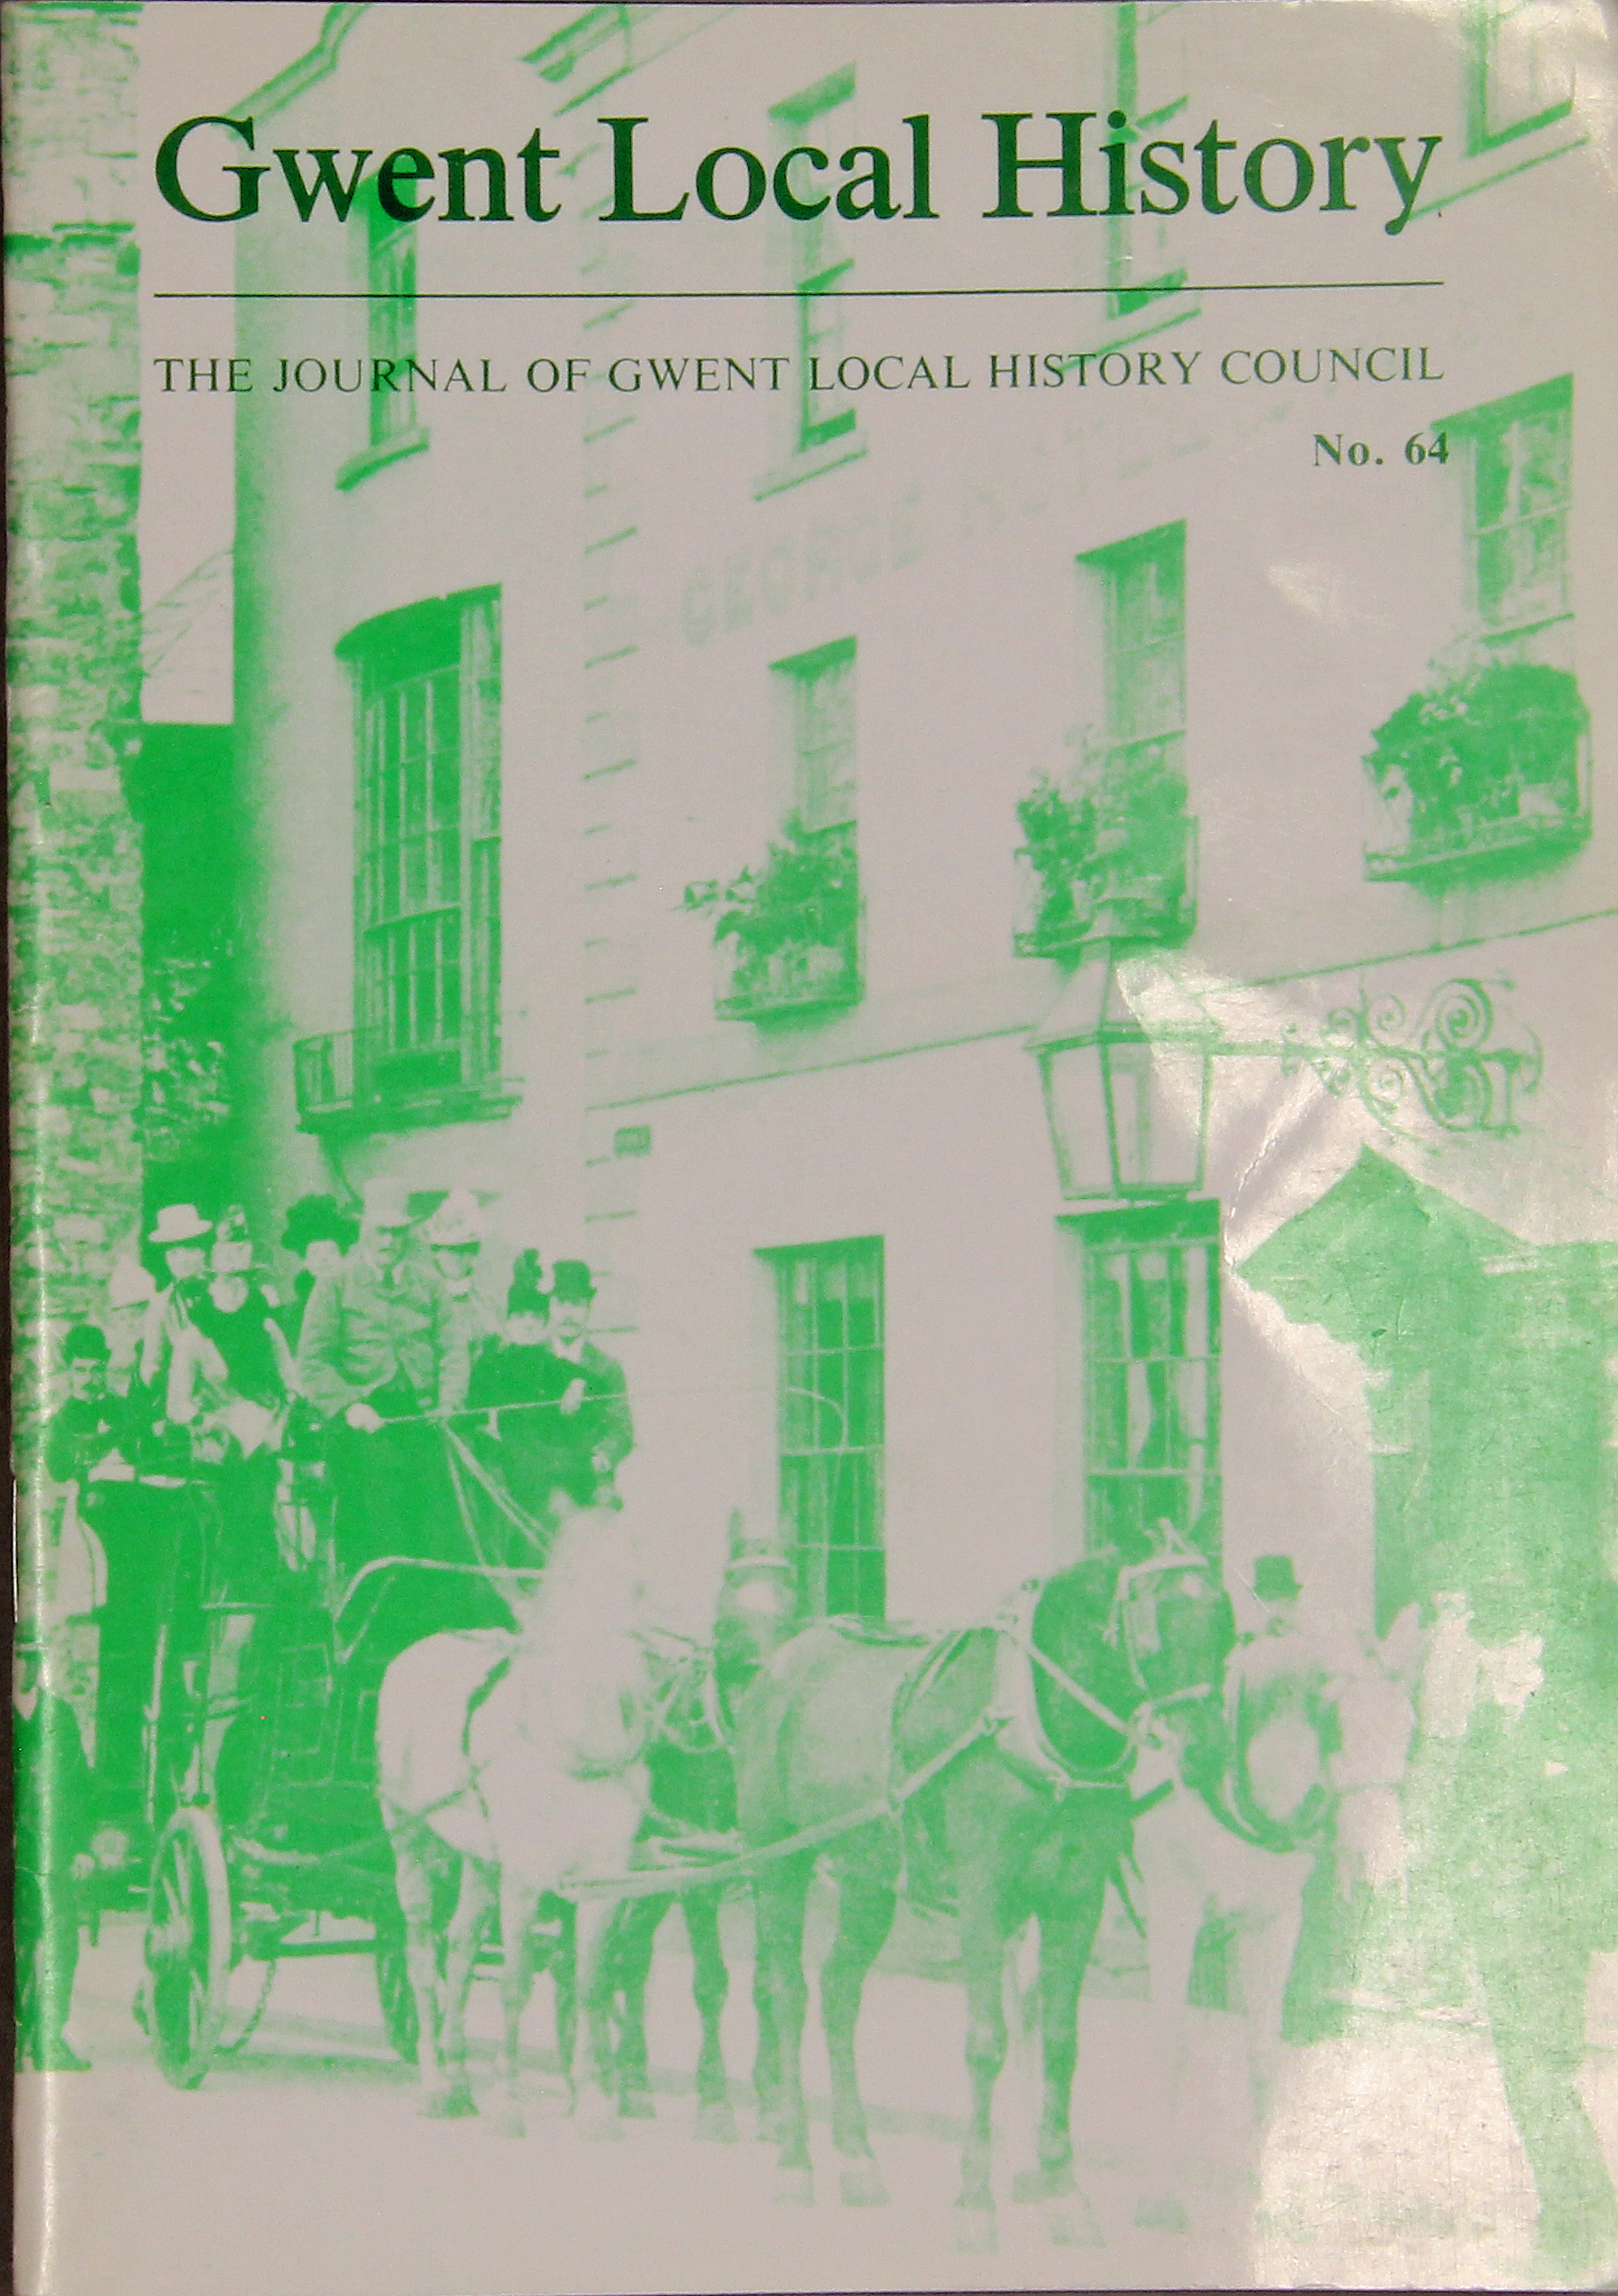 Gwent Local History: Journal of the Gwent Local History Council No.64, Spring 1988, £2.00